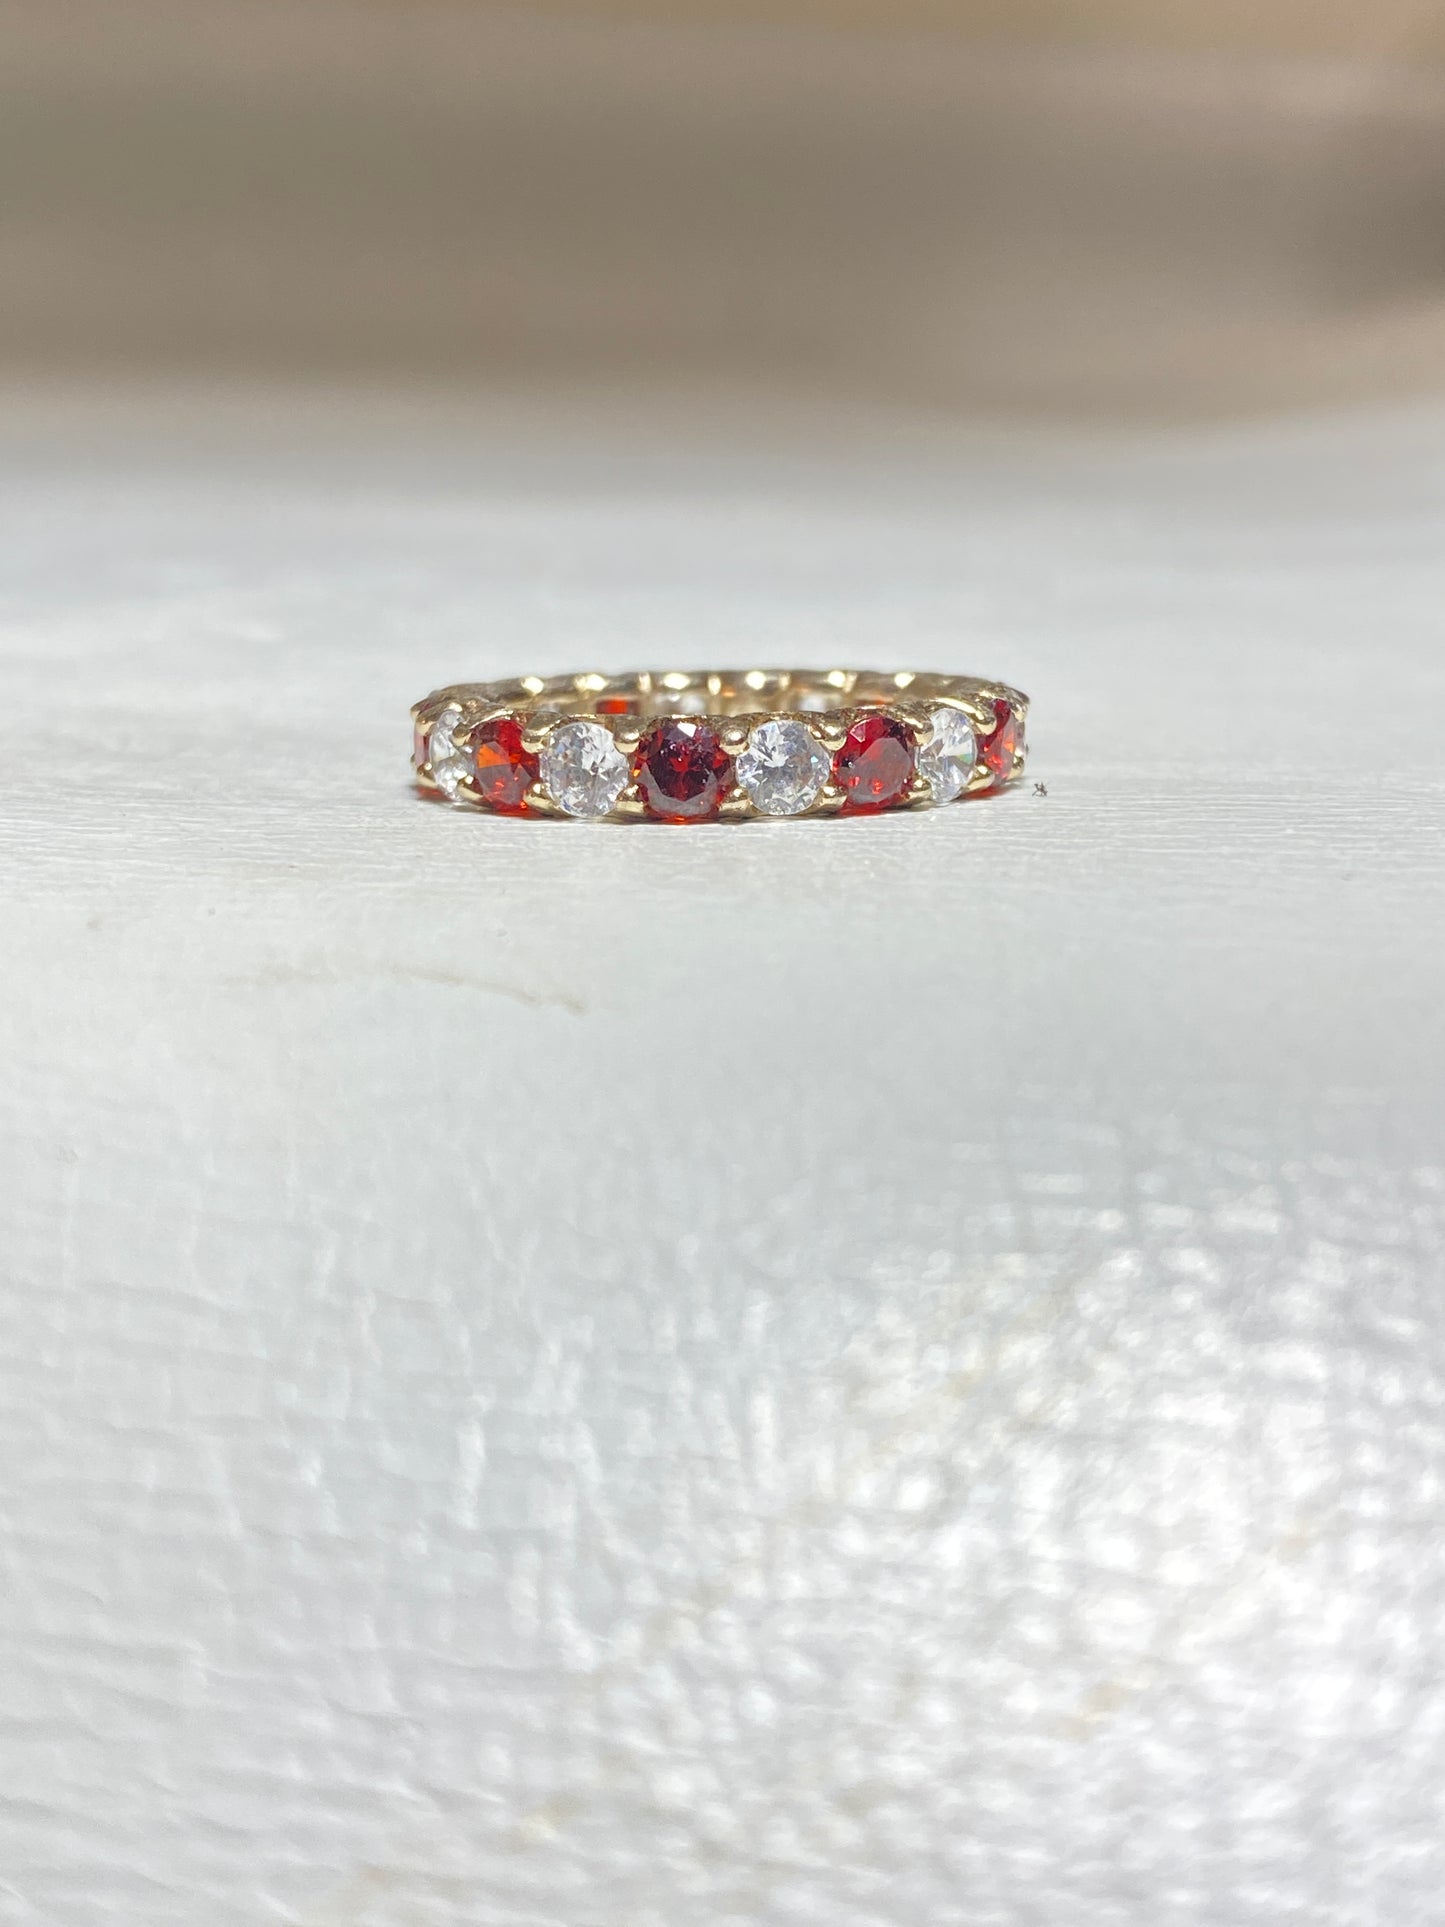 Eternity band red clear crystal stacker band ring sterling silver women girls